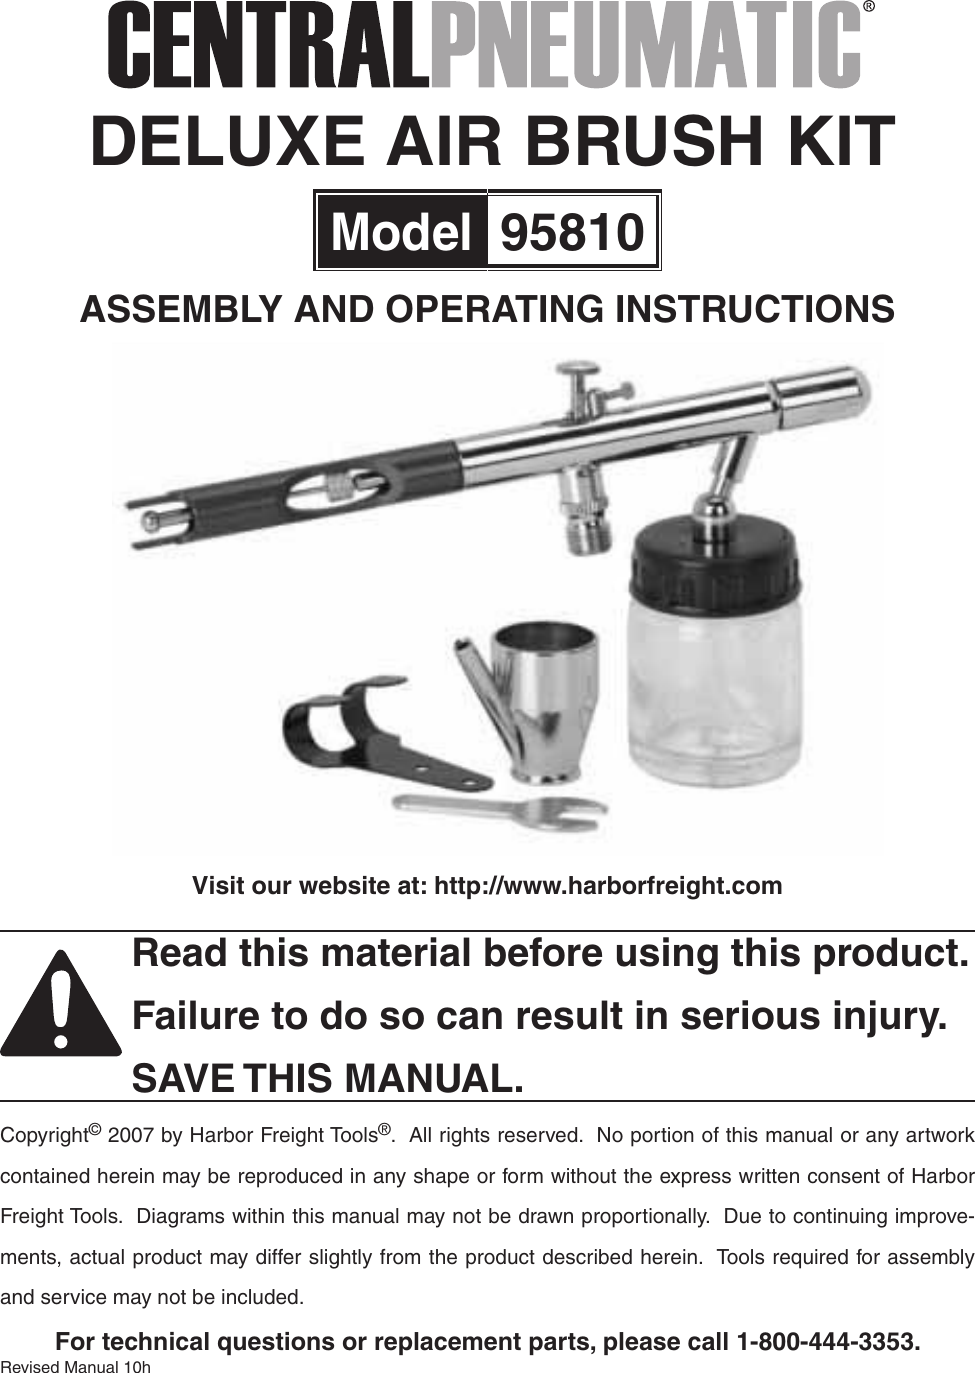 Page 1 of 7 - Harbor-Freight Harbor-Freight-3-4-Oz-Deluxe-Airbrush-Kit-Product-Manual-  Harbor-freight-3-4-oz-deluxe-airbrush-kit-product-manual